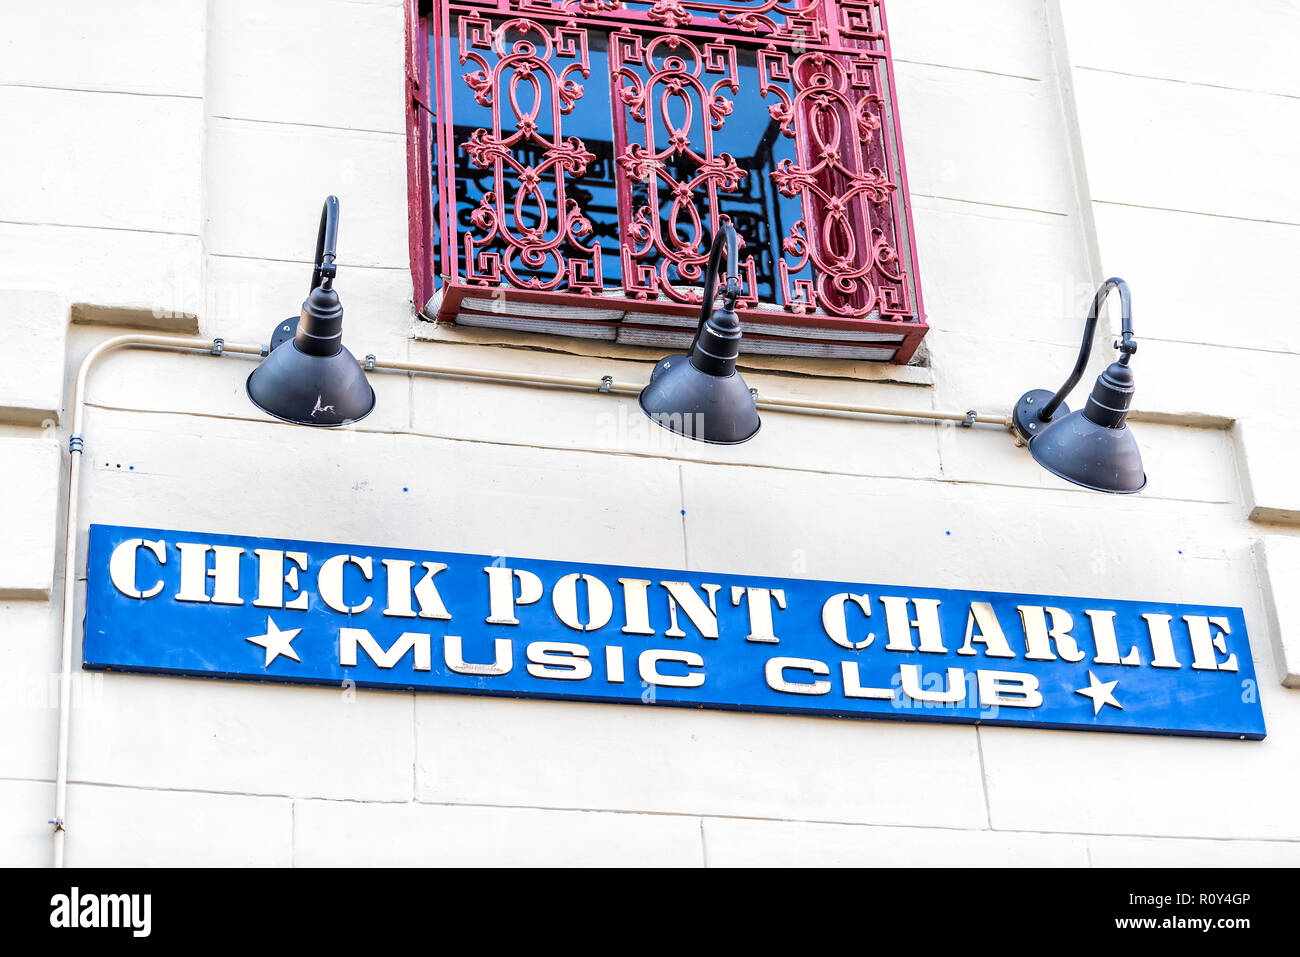 New Orleans, USA - April 22, 2018: Frenchmen street in Louisiana town, city, building, sign closeup for Check Point Charlie Music Club Stock Photo